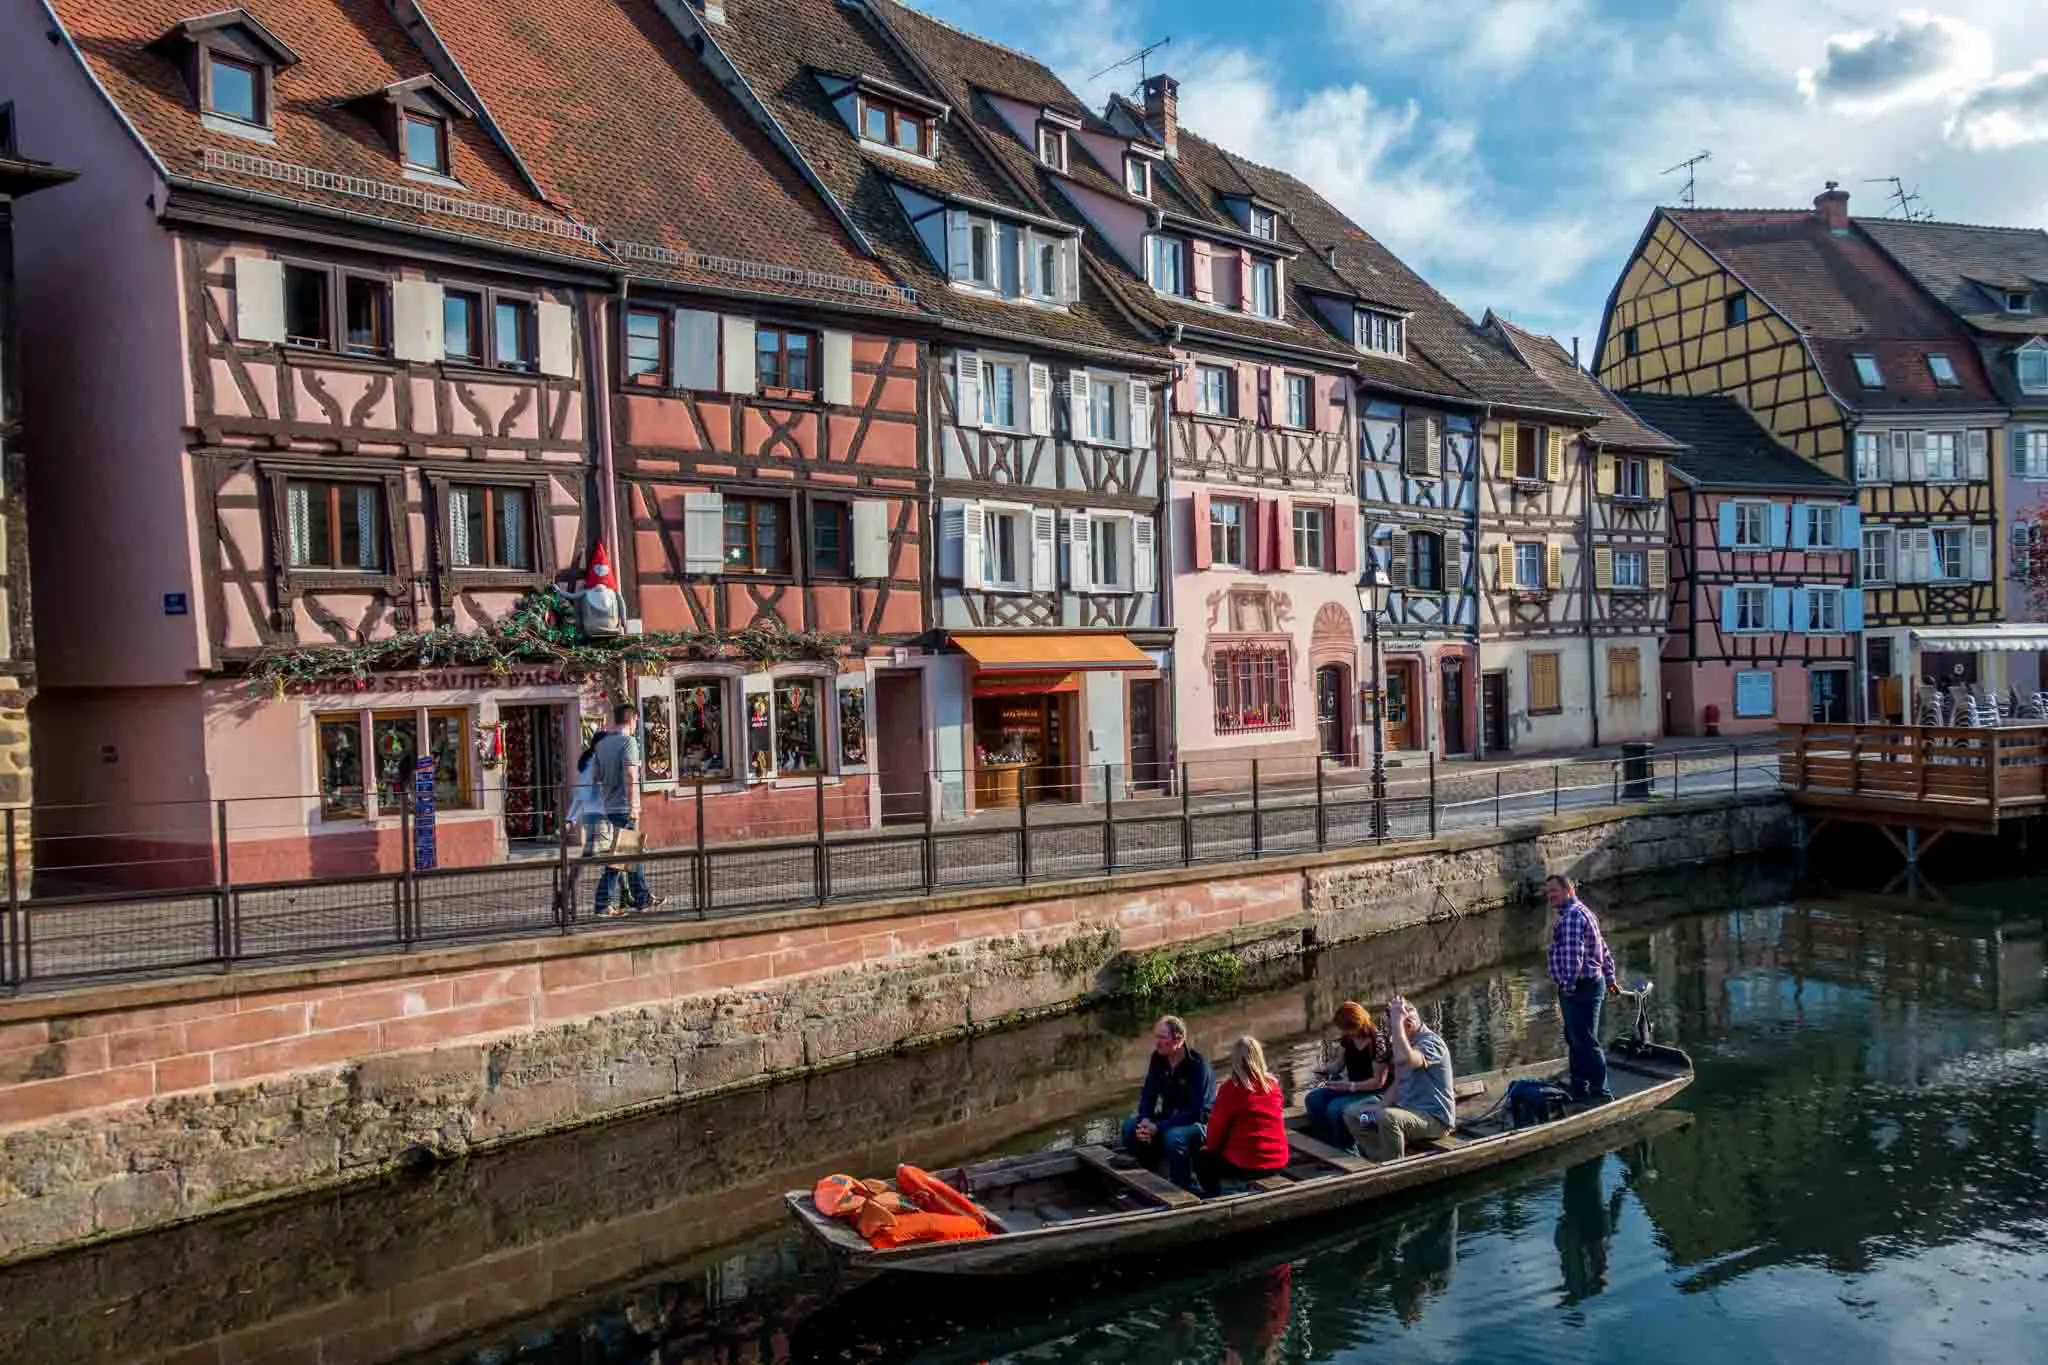 Boat in the river in front of a row of half-timbered buildings in Colmar